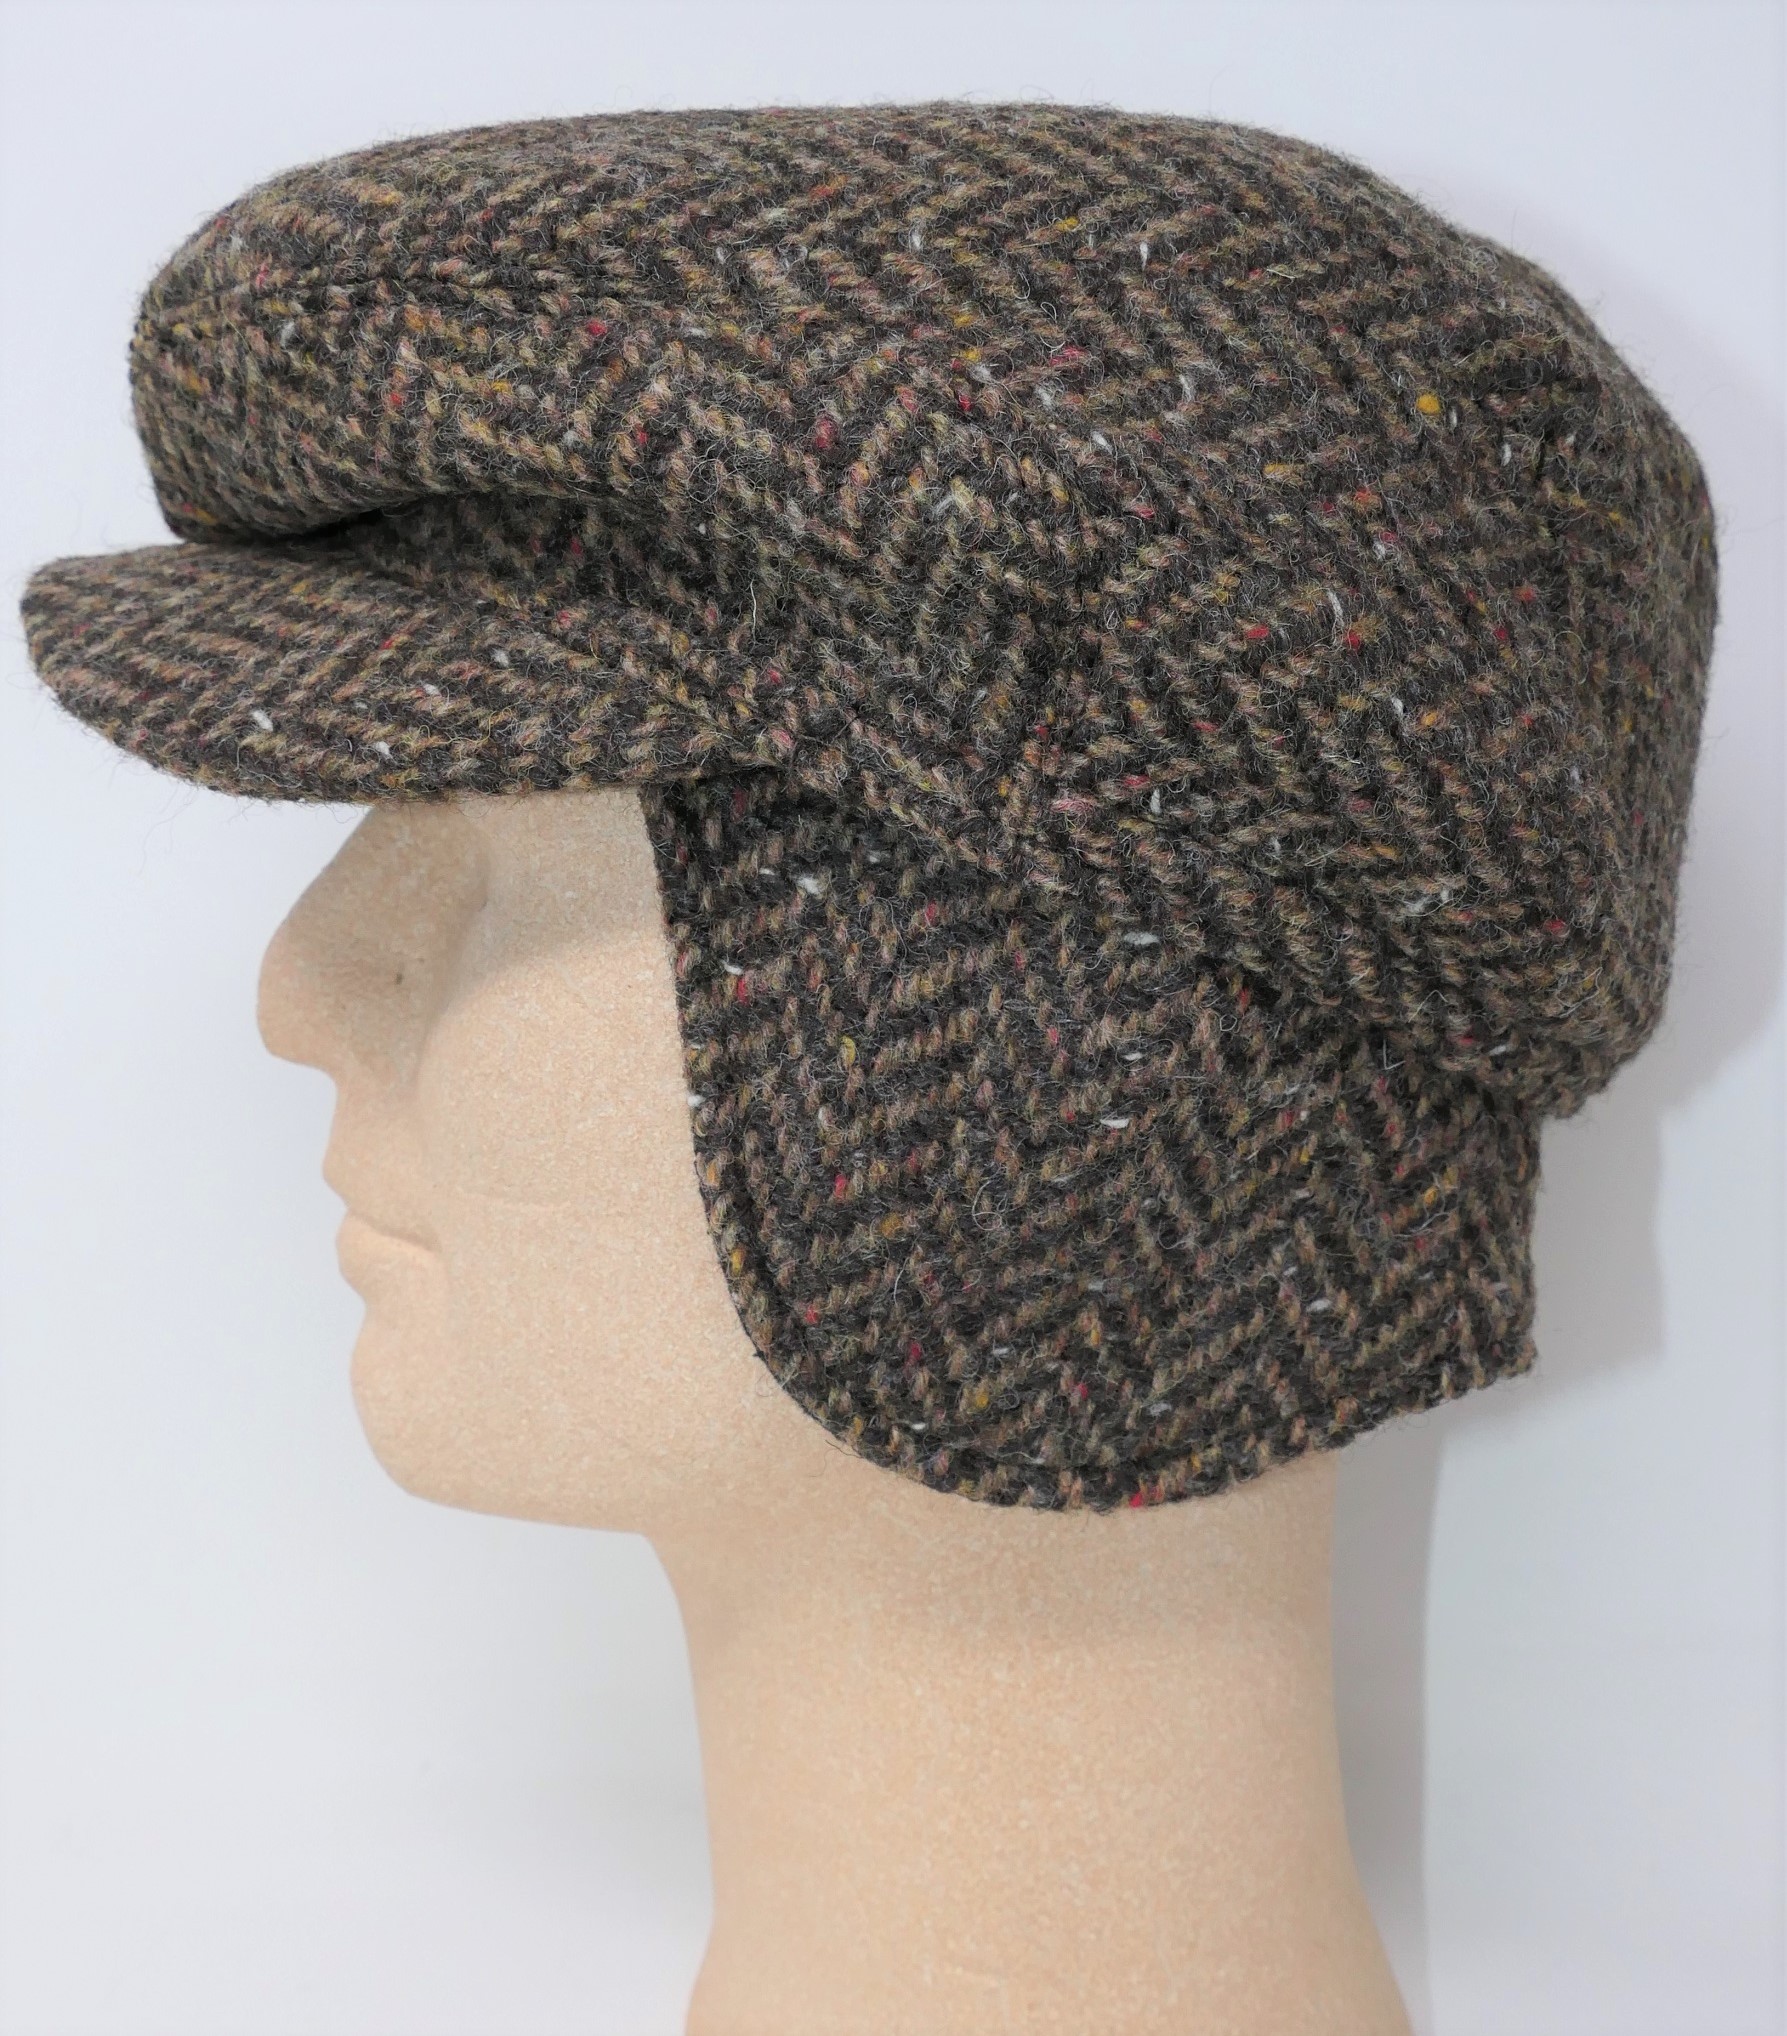 Donegal Cap with earflaps